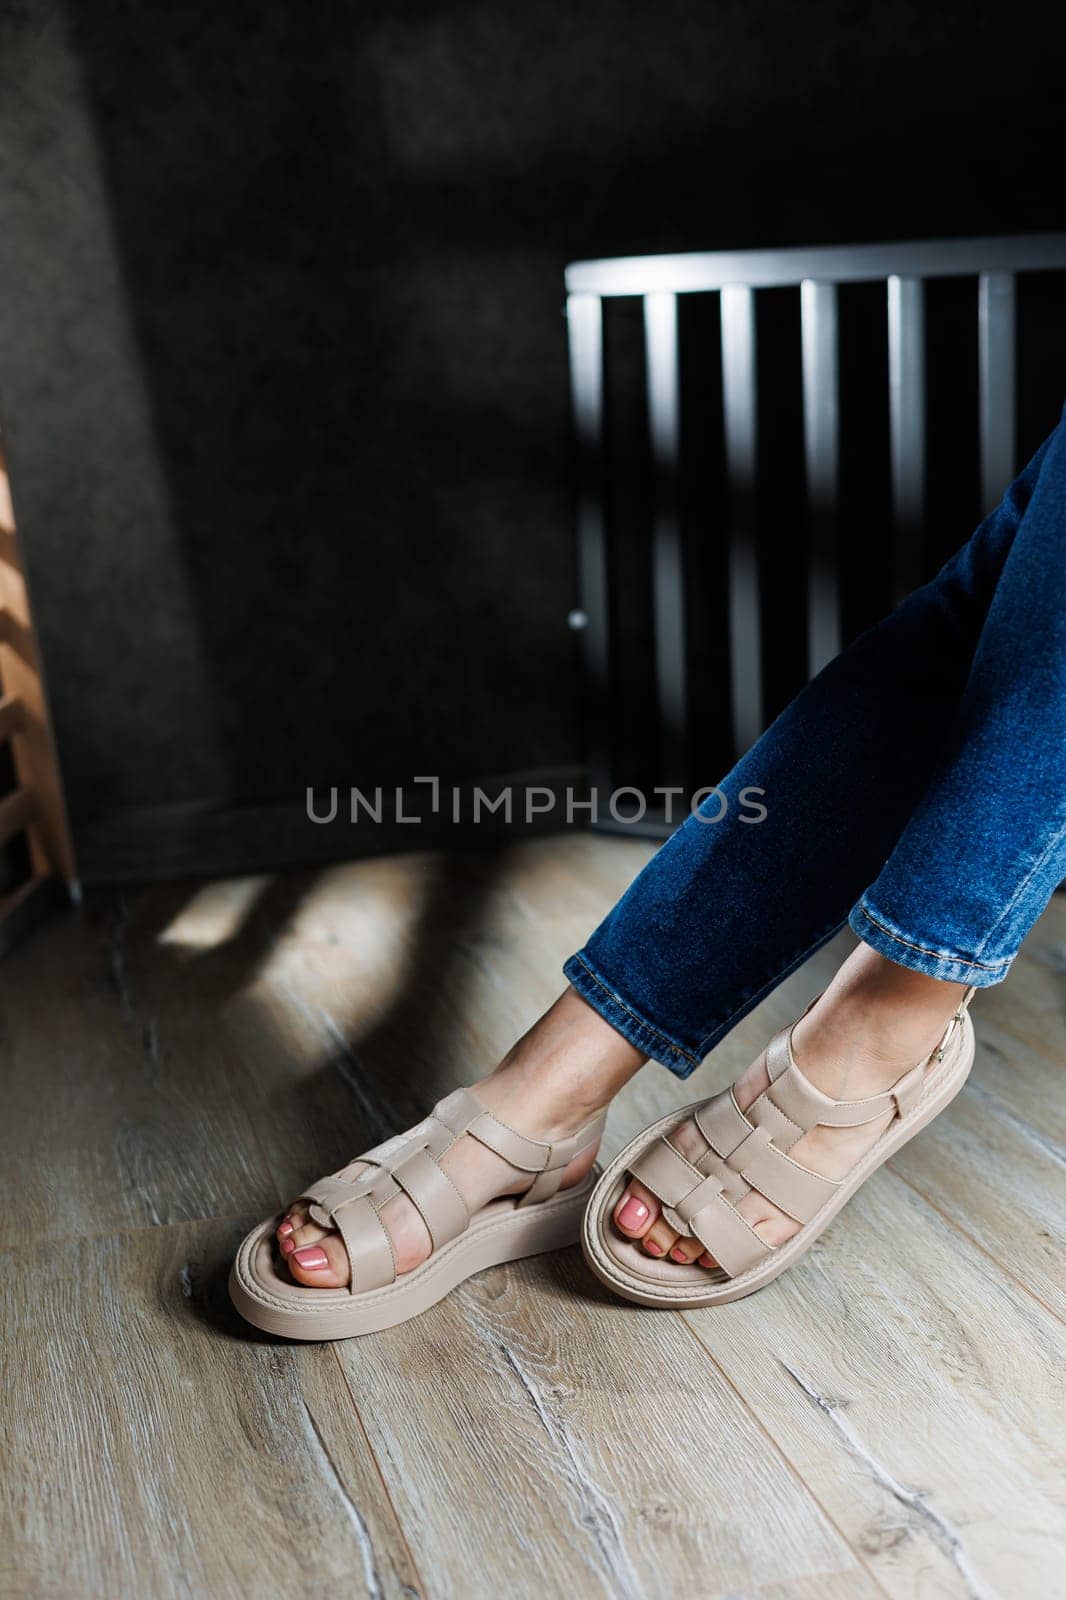 Summer women's sandals. Collection of women's leather summer sandals. Slender female legs in beige leather sandals without heels.